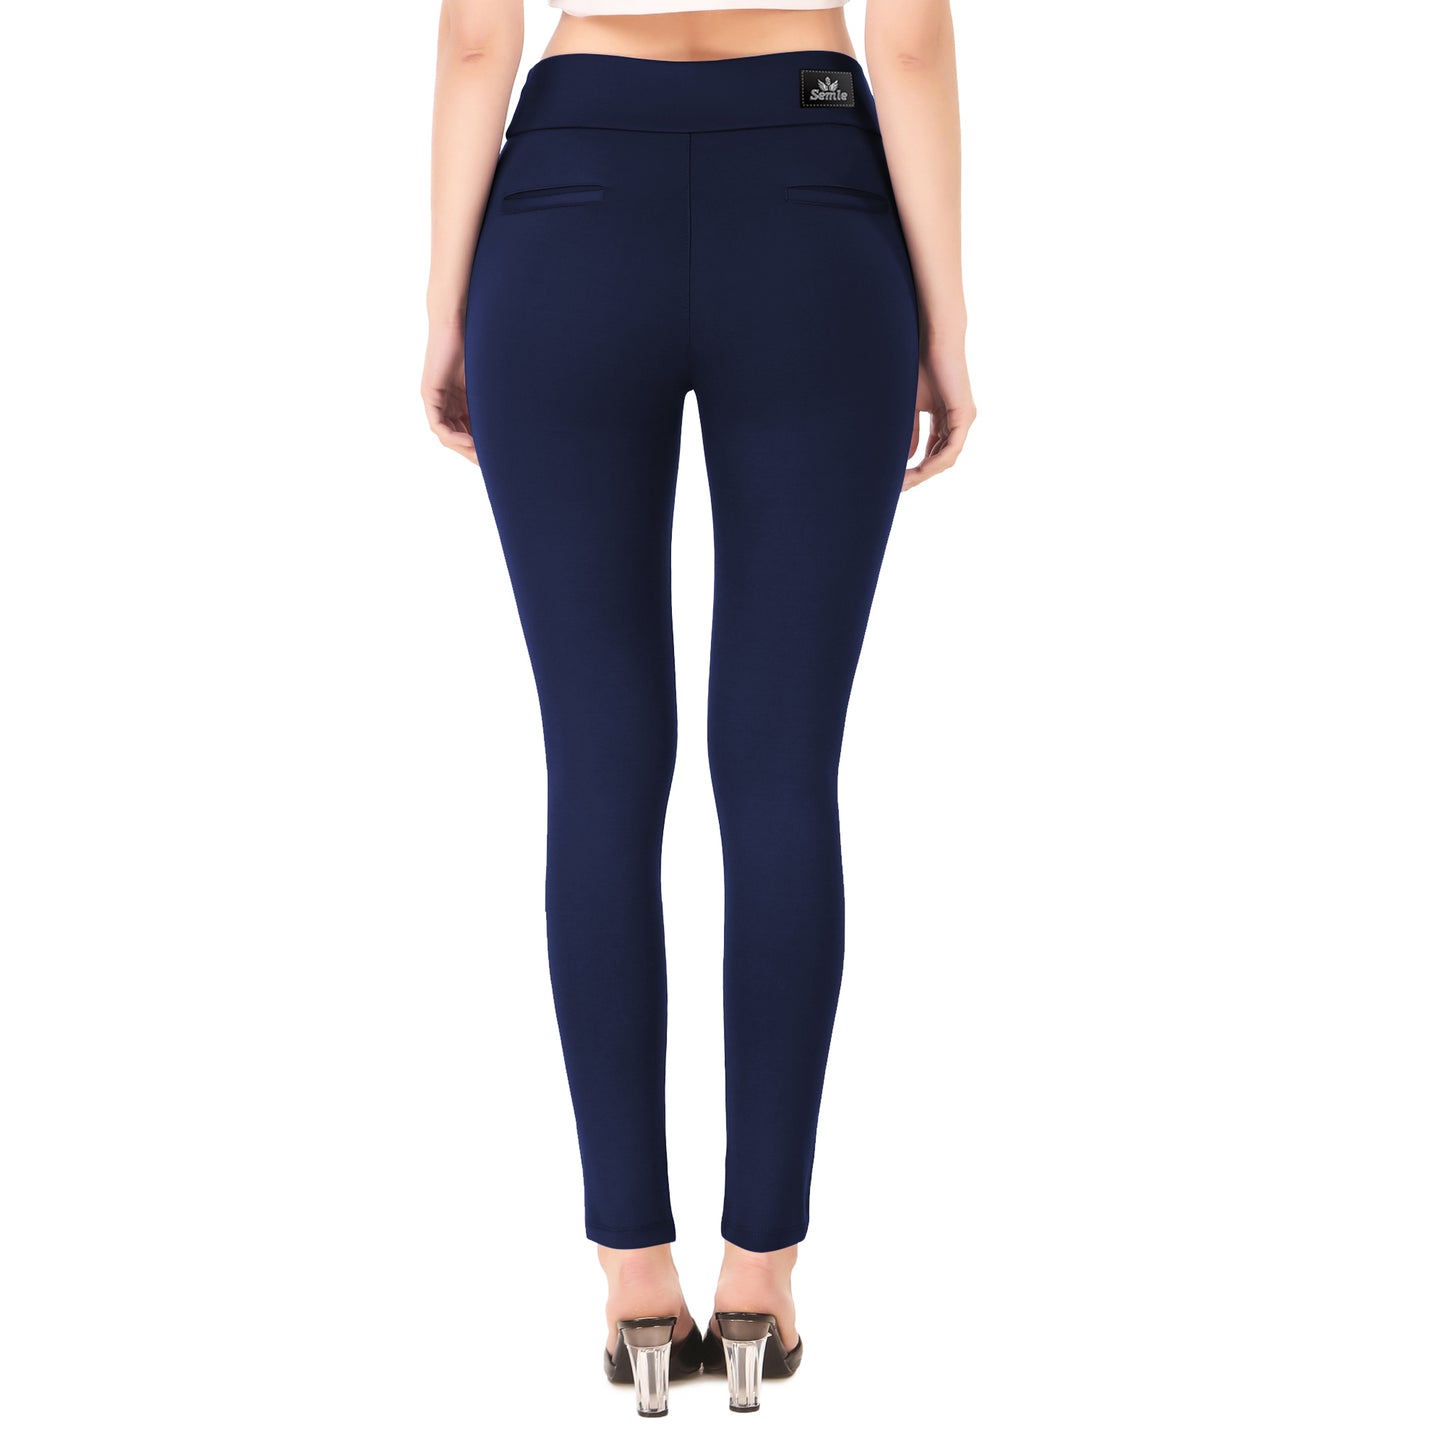 Most Comfortable Women's Mid-Waist Jeggings with 2 Front Pockets - Navy Blue